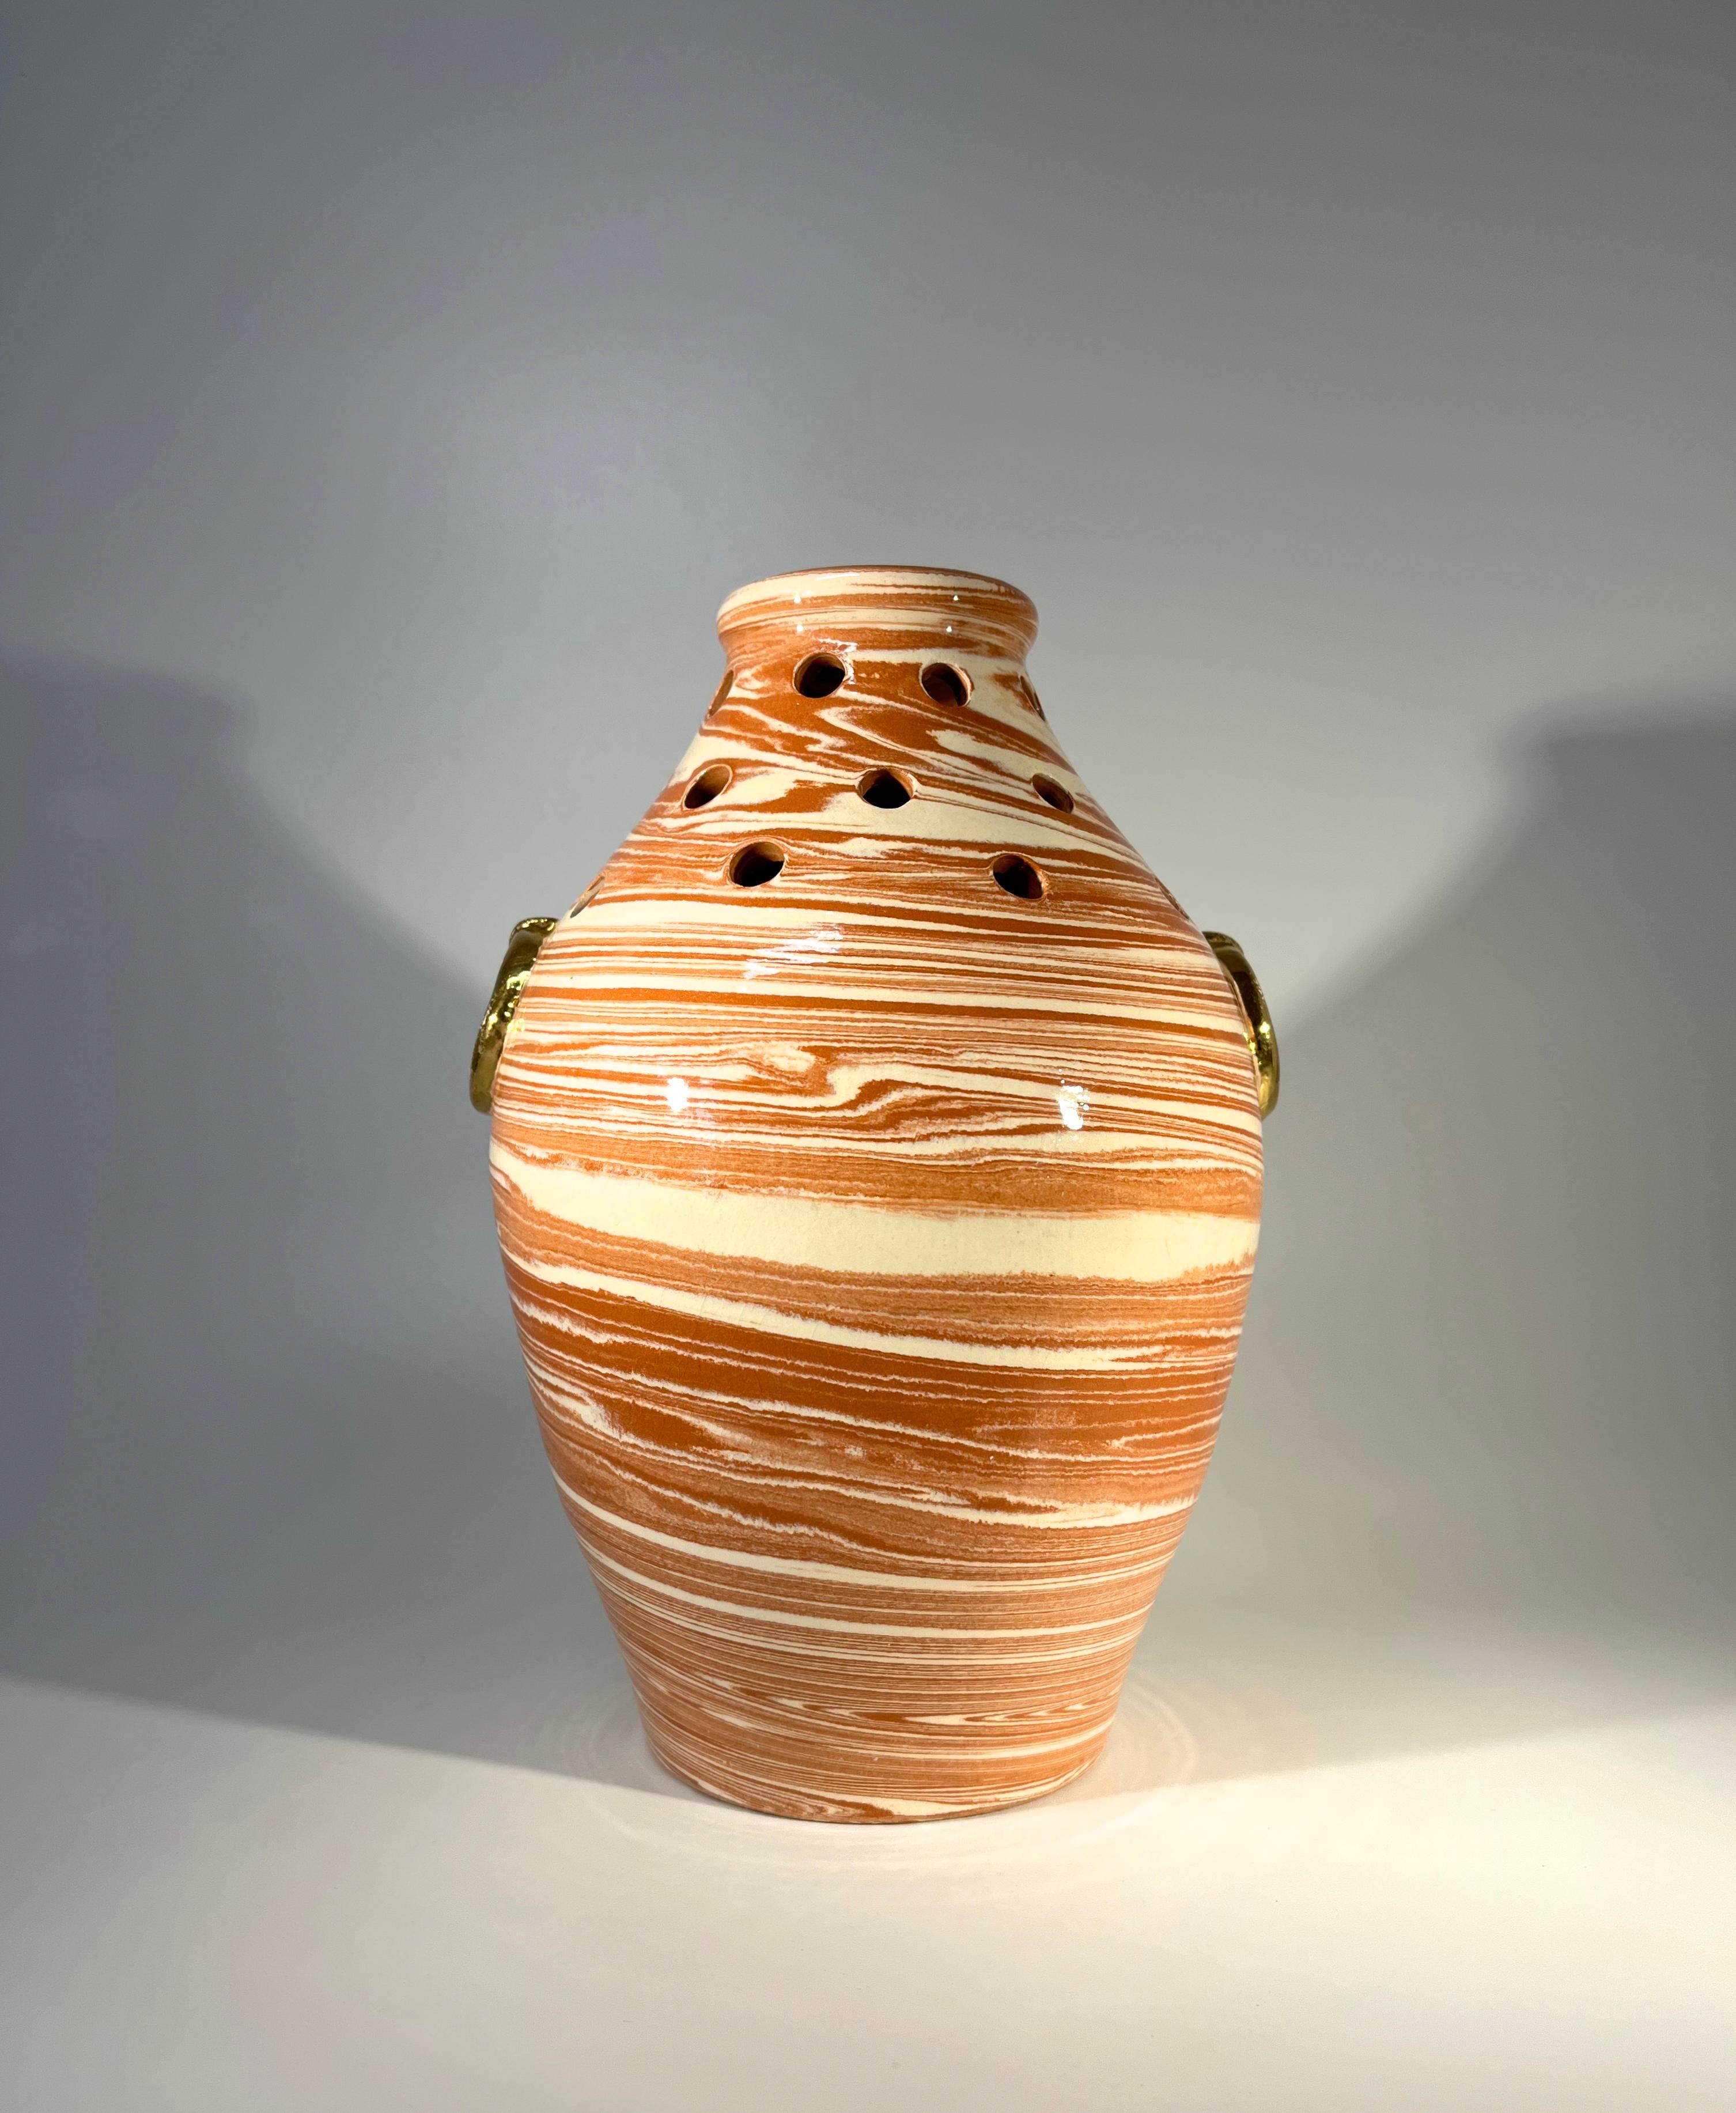 French Atypical, Pierced Glazed Ceramic Urn Vase, Vallauris, France c1970's For Sale